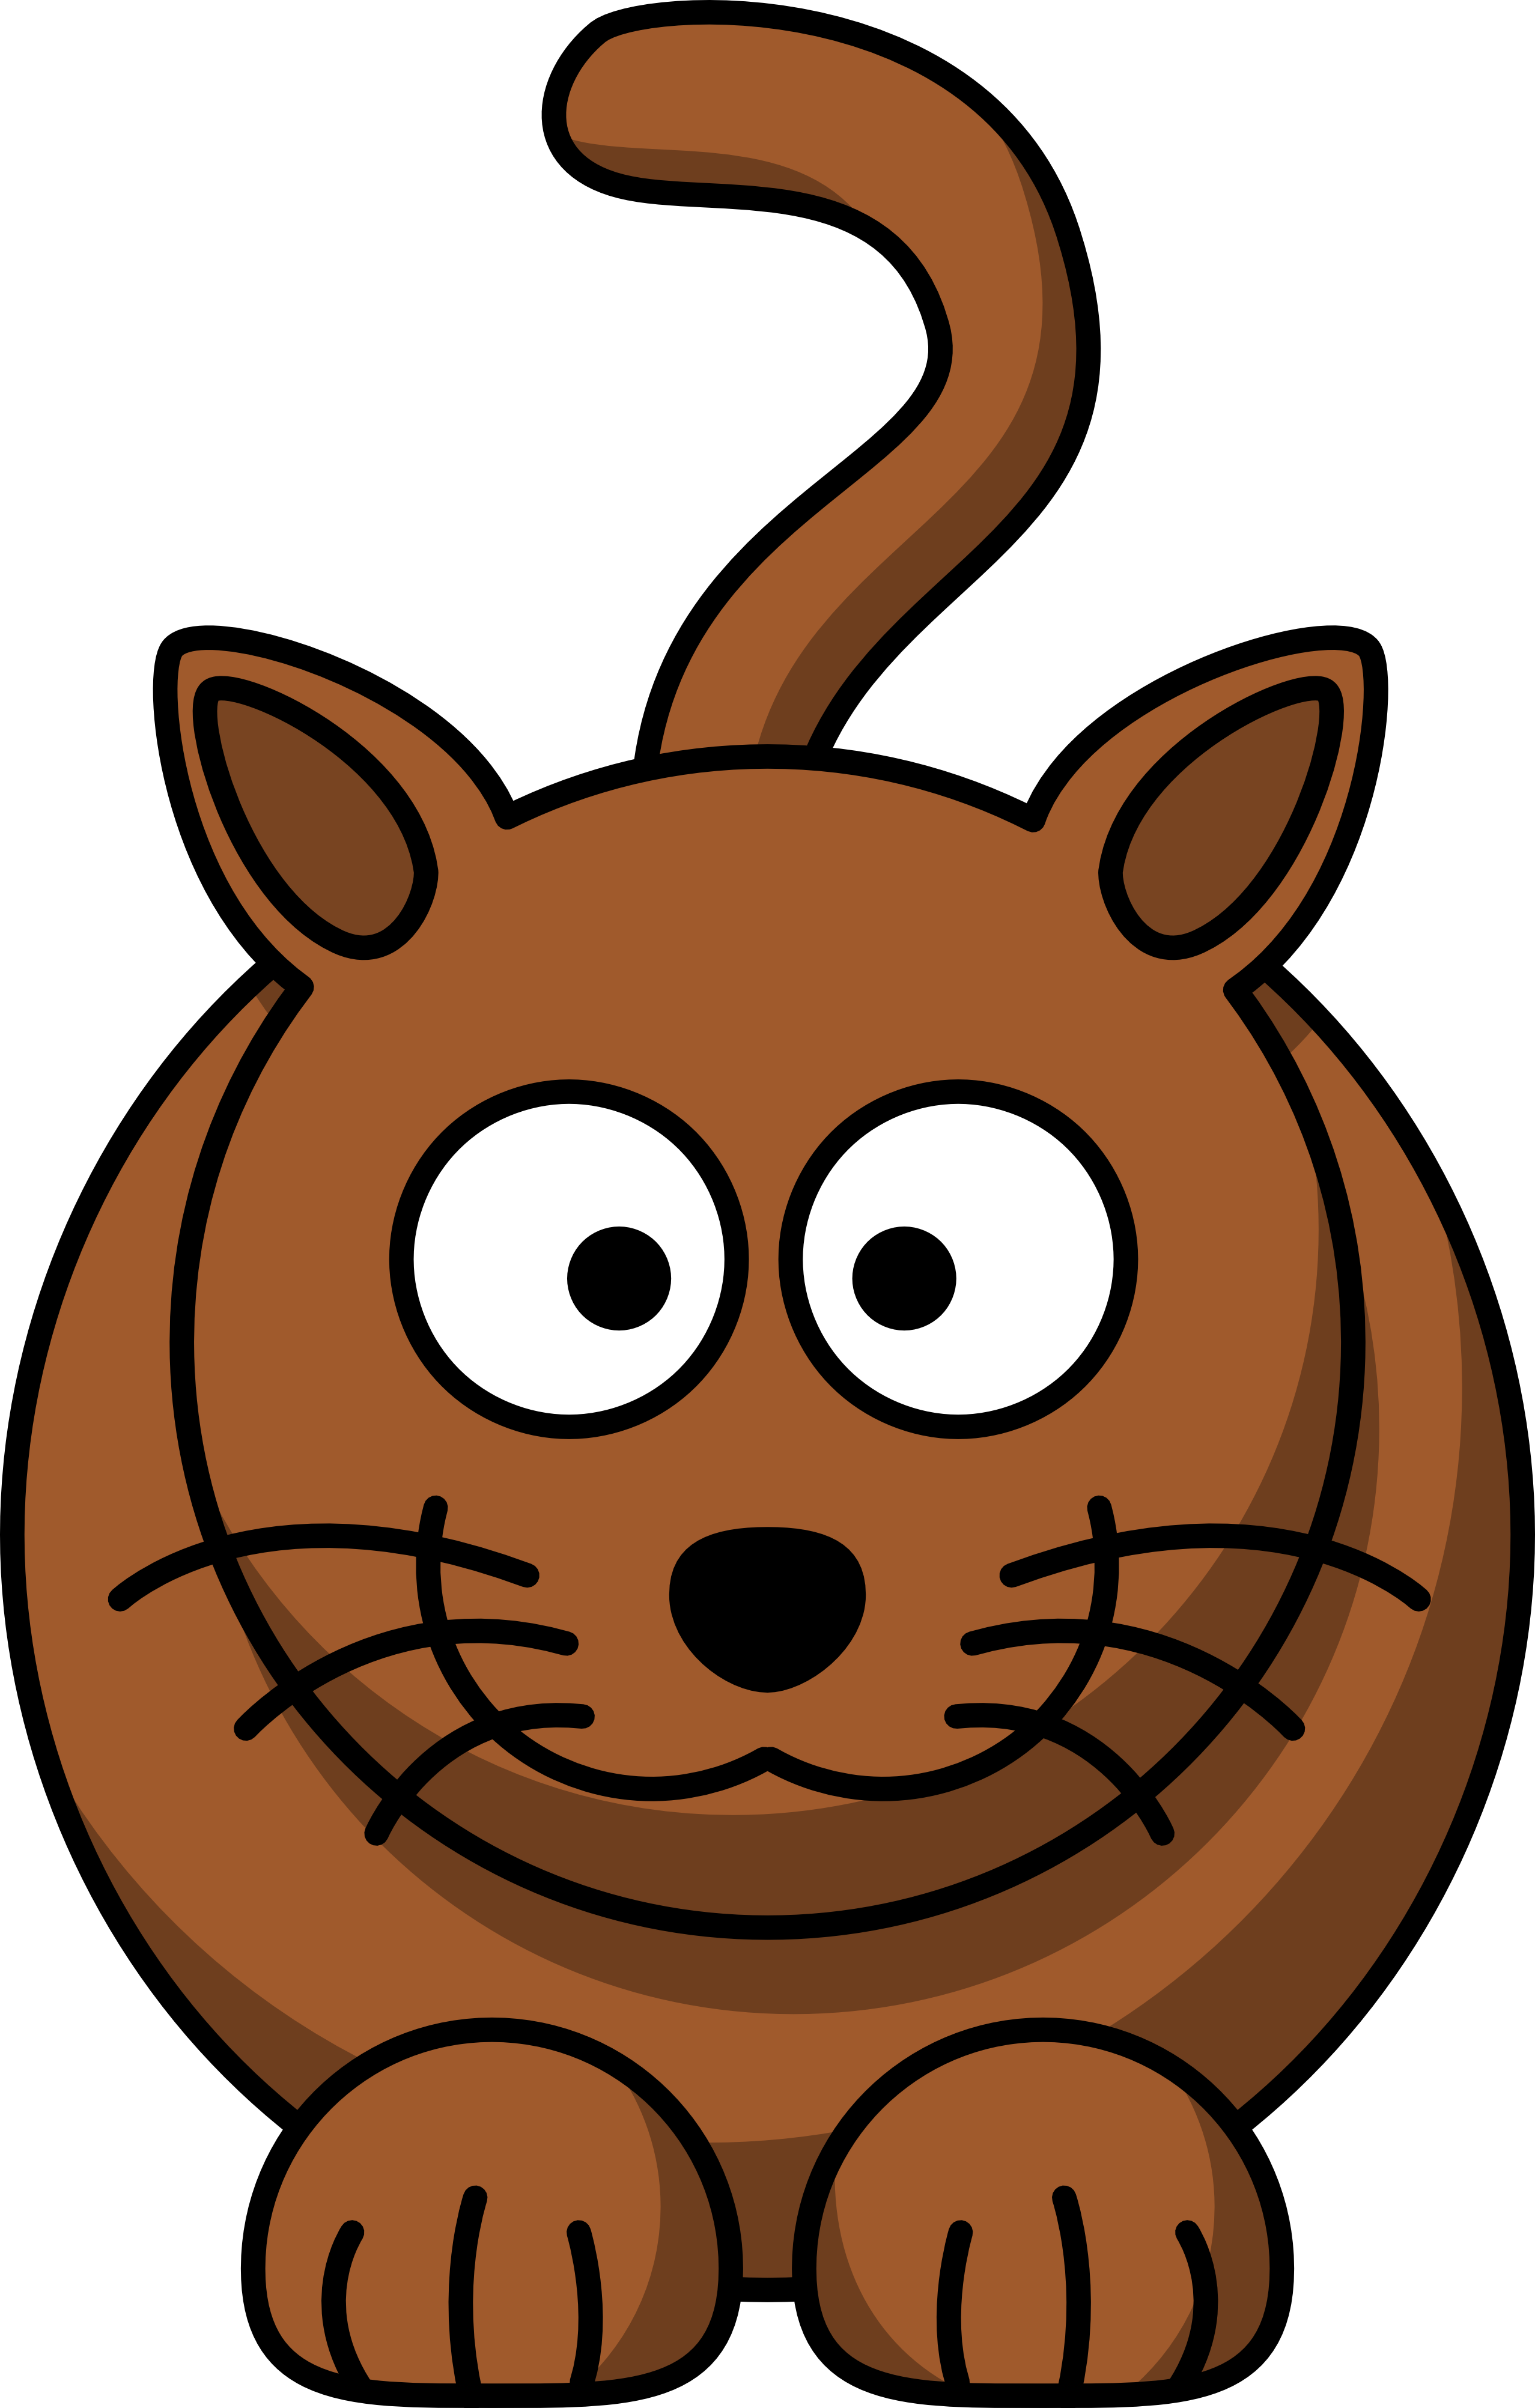 Clip Art: Lemmling Cartoon Cat Scalable Vector  - Clipart library 